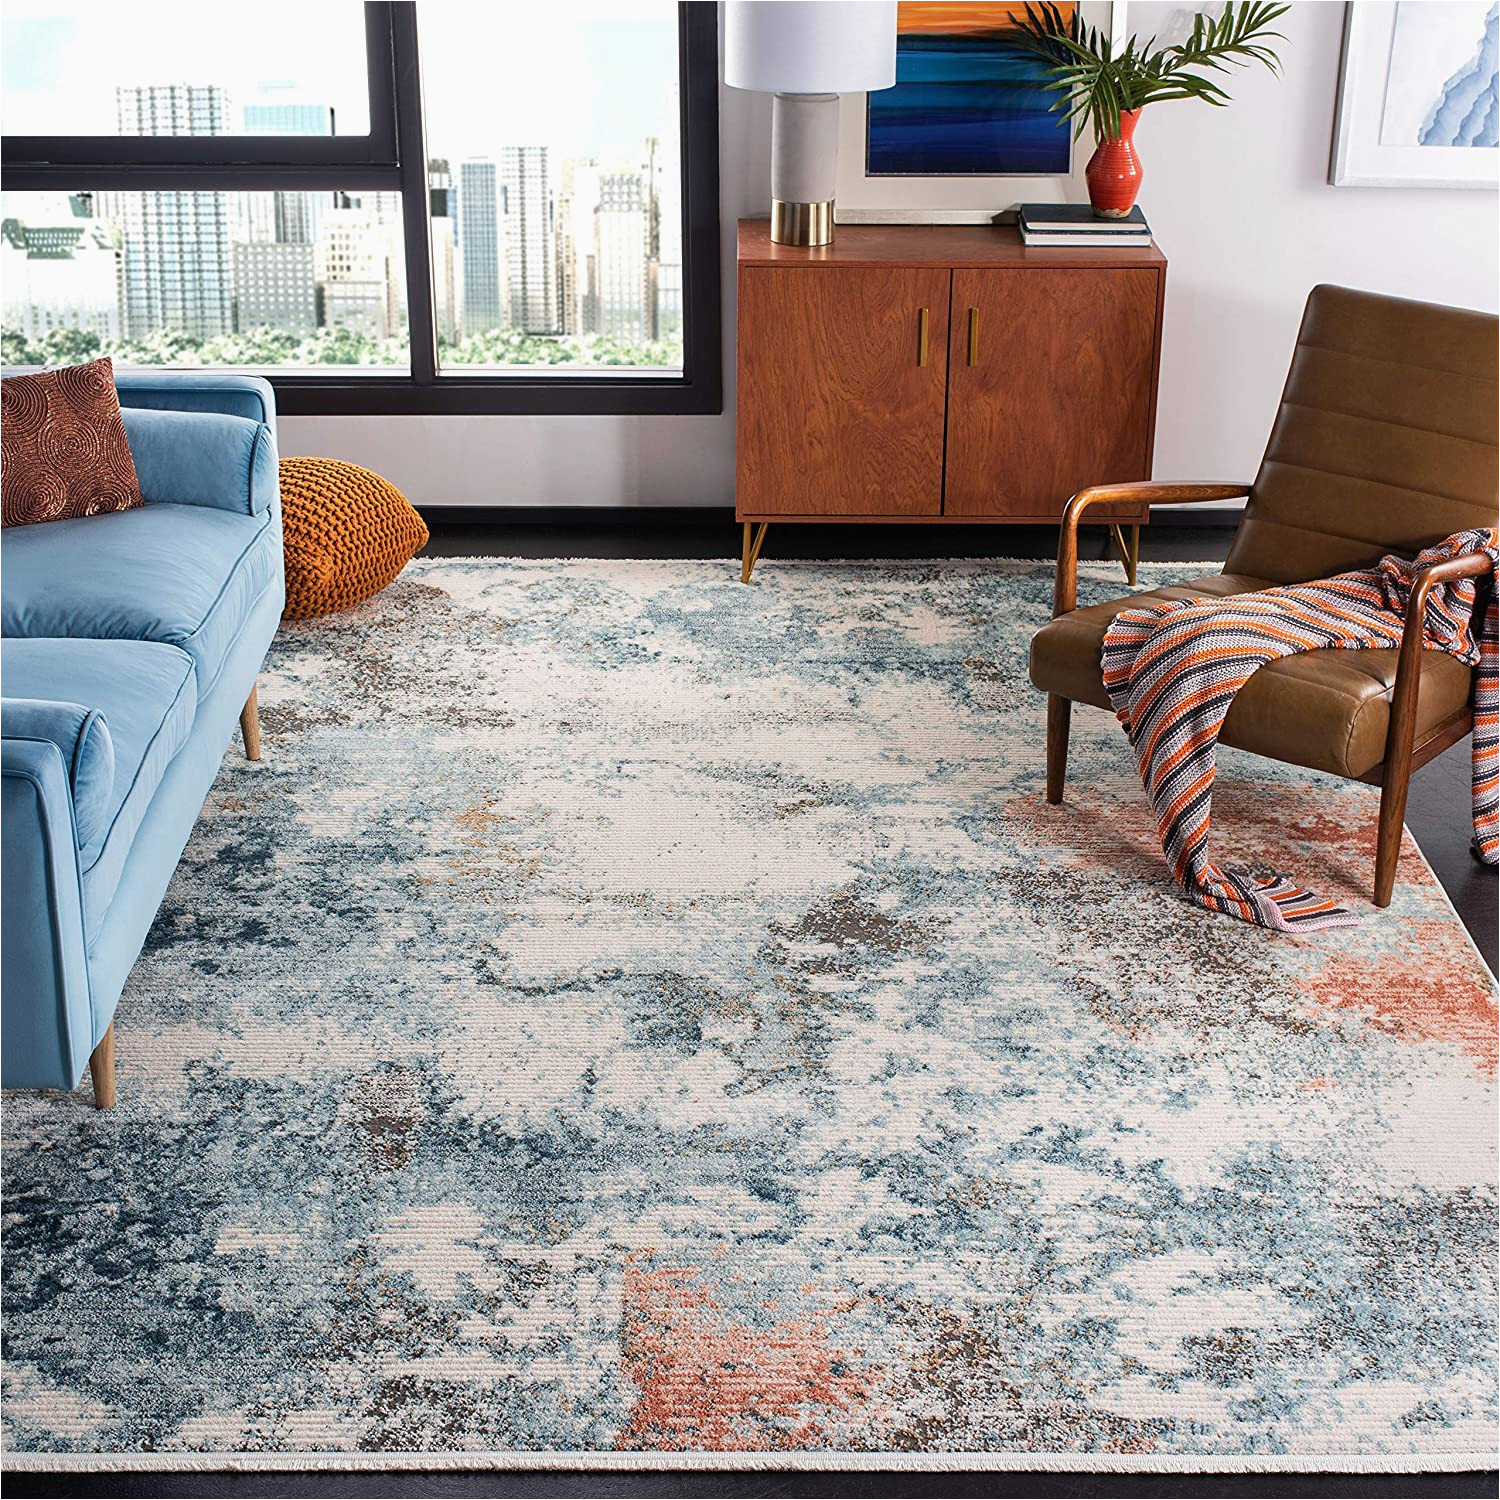 Huma Blue Ivory area Rug Safavieh Shivan Collection 9′ X 12′ Blue/ivory Shv743m Modern Abstract Non-shedding Living Room Bedroom Dining Home Office area Rug